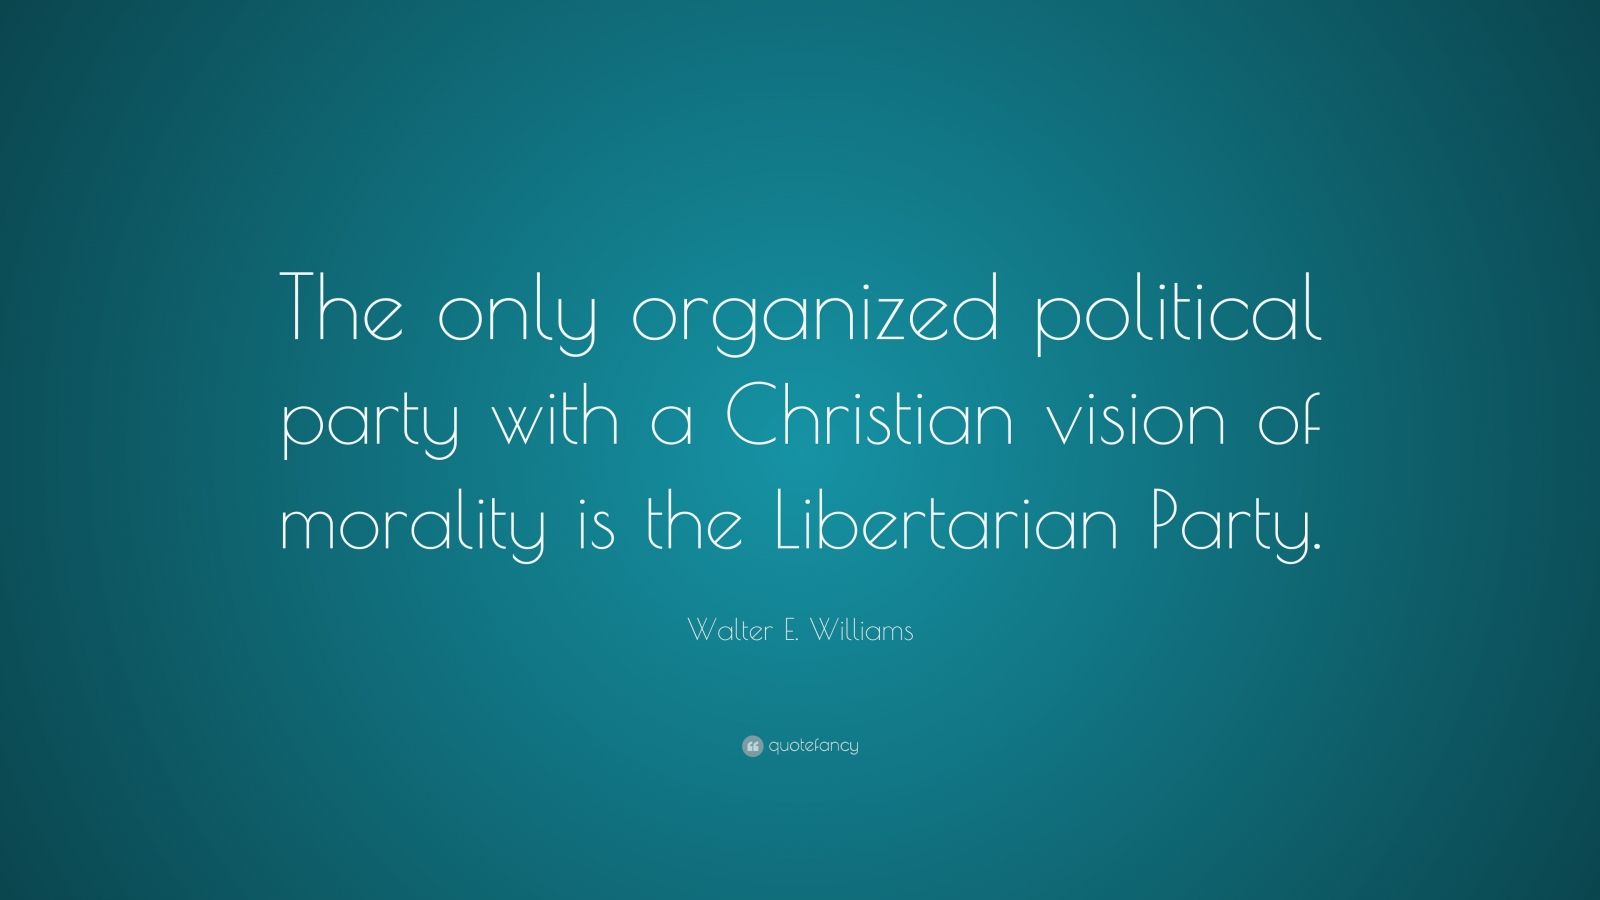 Walter E. Williams Quote “The only organized political party with a